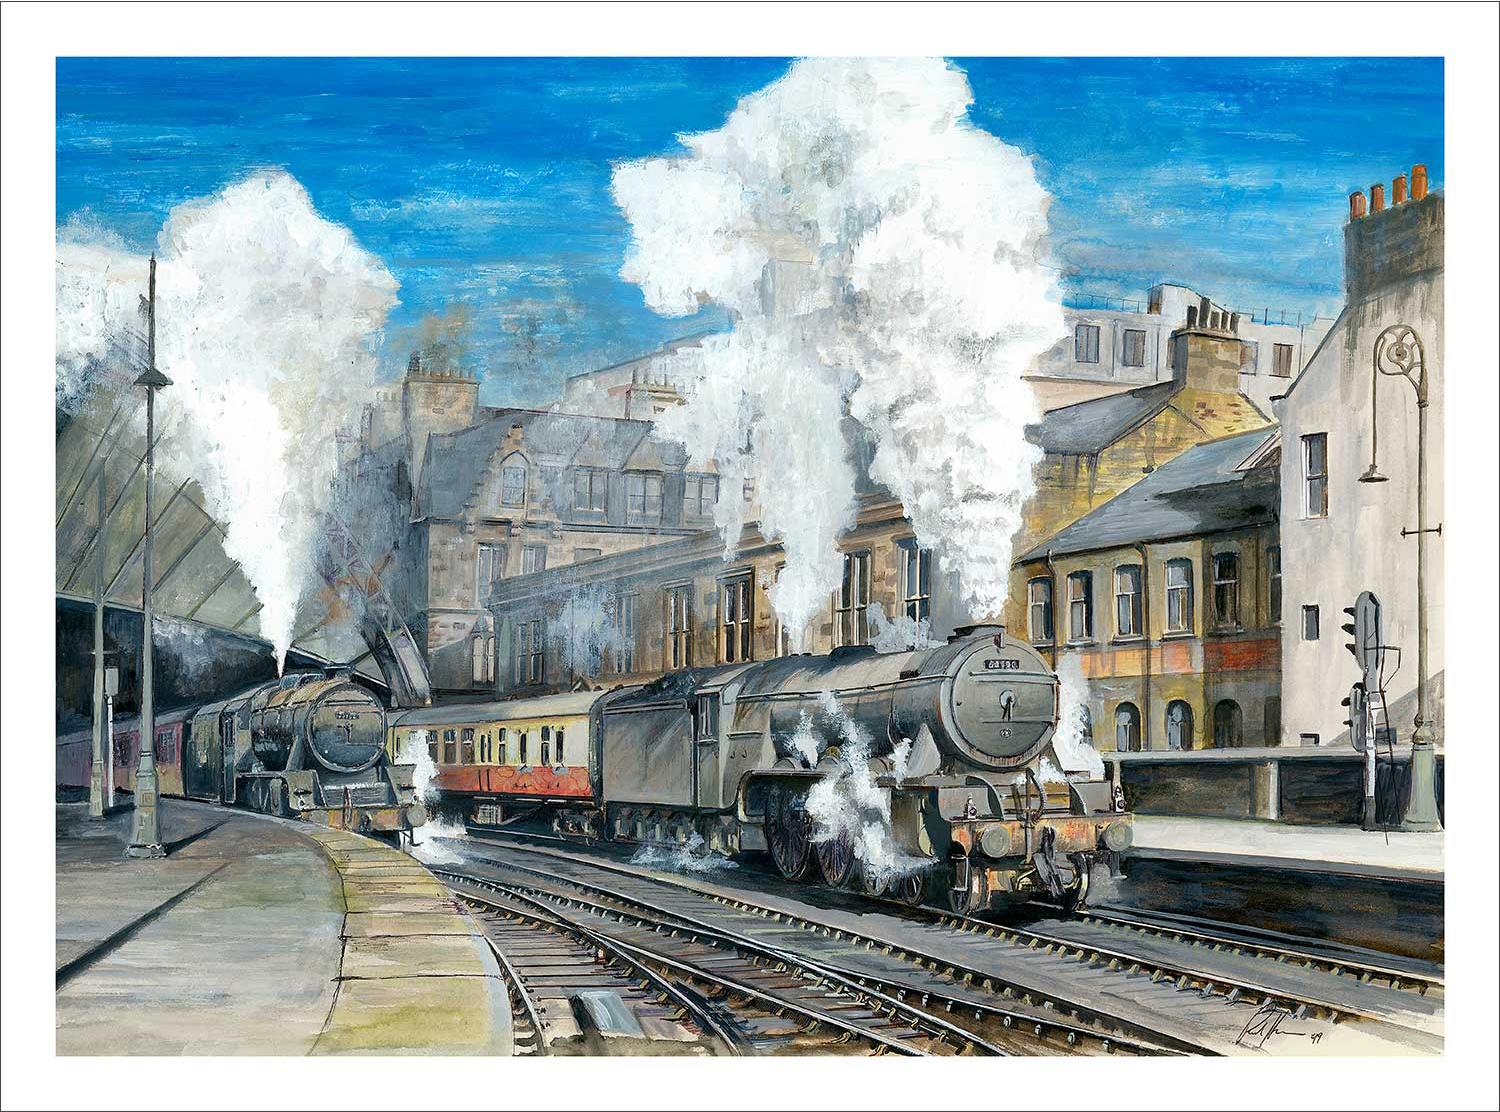 A3 at St Enoch, Glasgow Art Print from an original painted by artist Rod Harrison